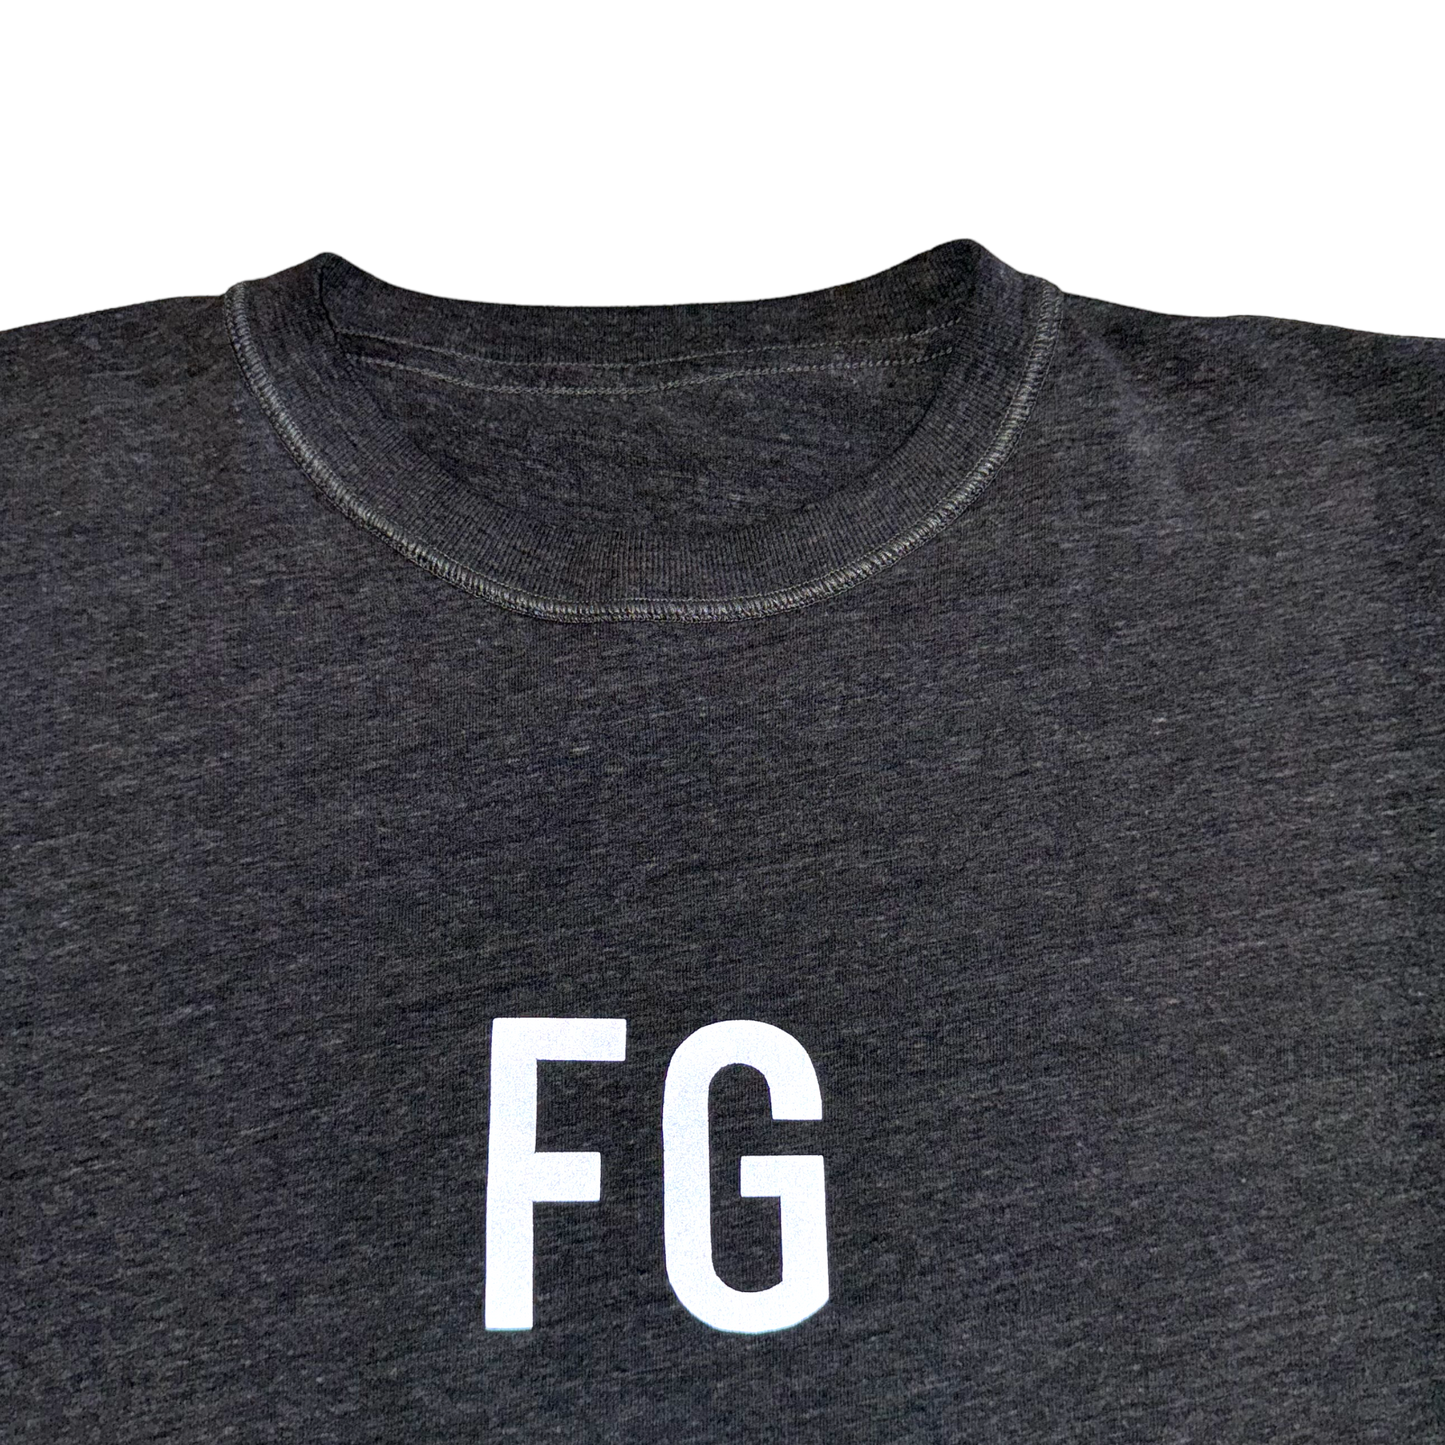 Fear of God - Sixth Collection Reflective FG T-Shirt